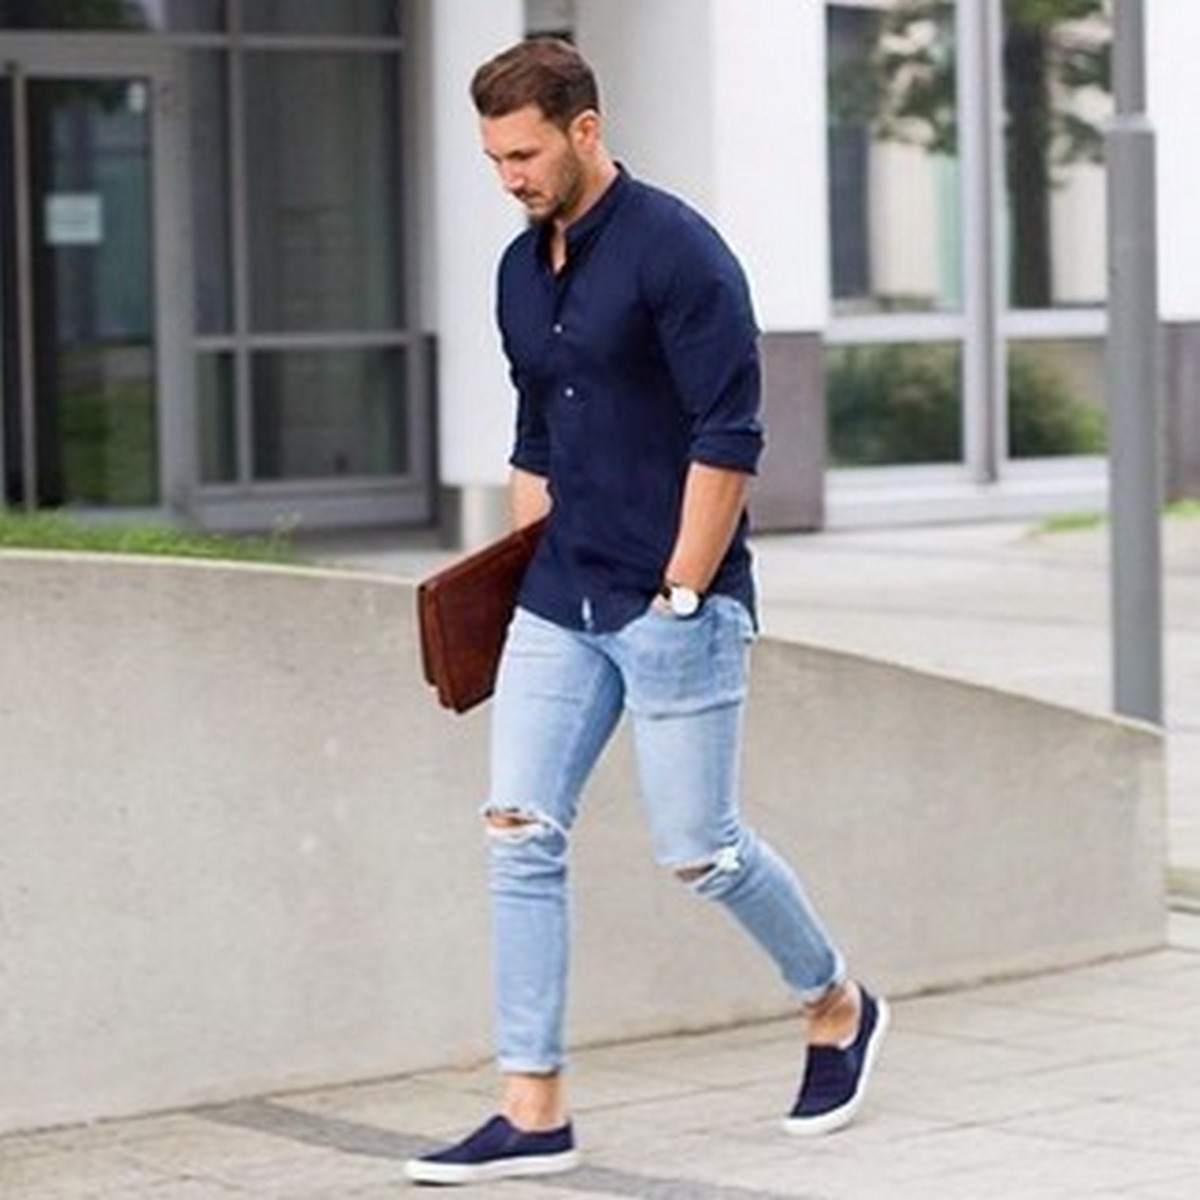 Navy Long-Sleeve Shirt, Chinos, And Blue Shoes